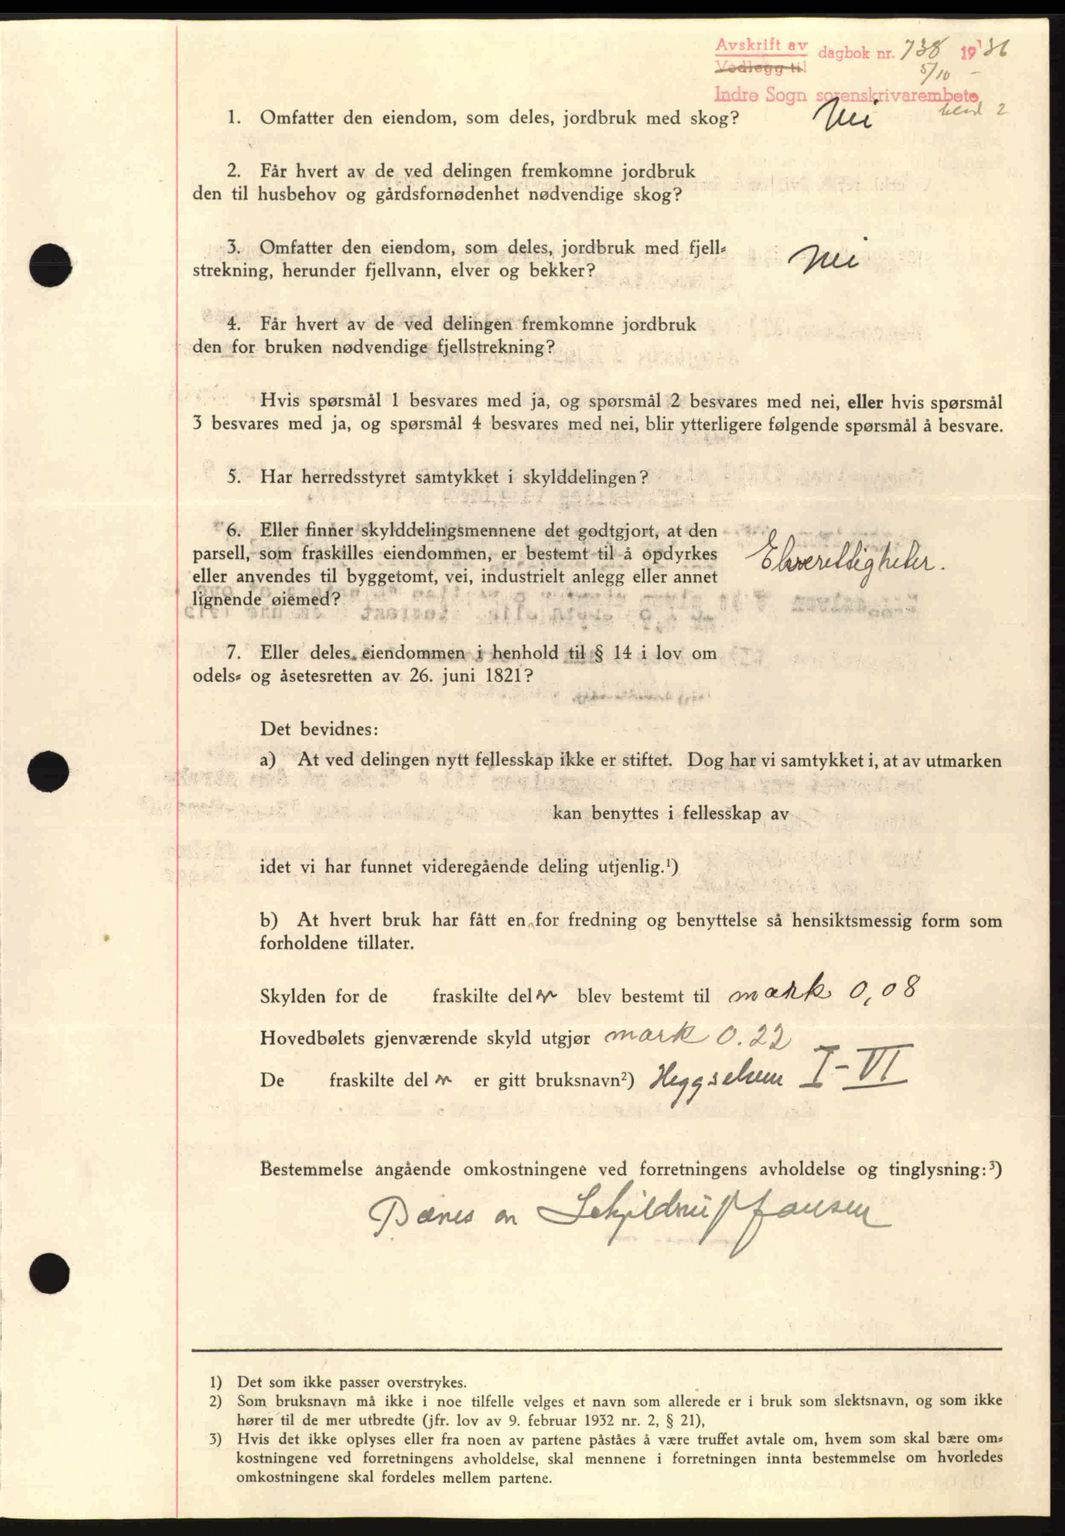 Indre Sogn tingrett, SAB/A-3301/1/G/Gb/Gba/L0030: Mortgage book no. 30, 1935-1937, Deed date: 05.10.1936